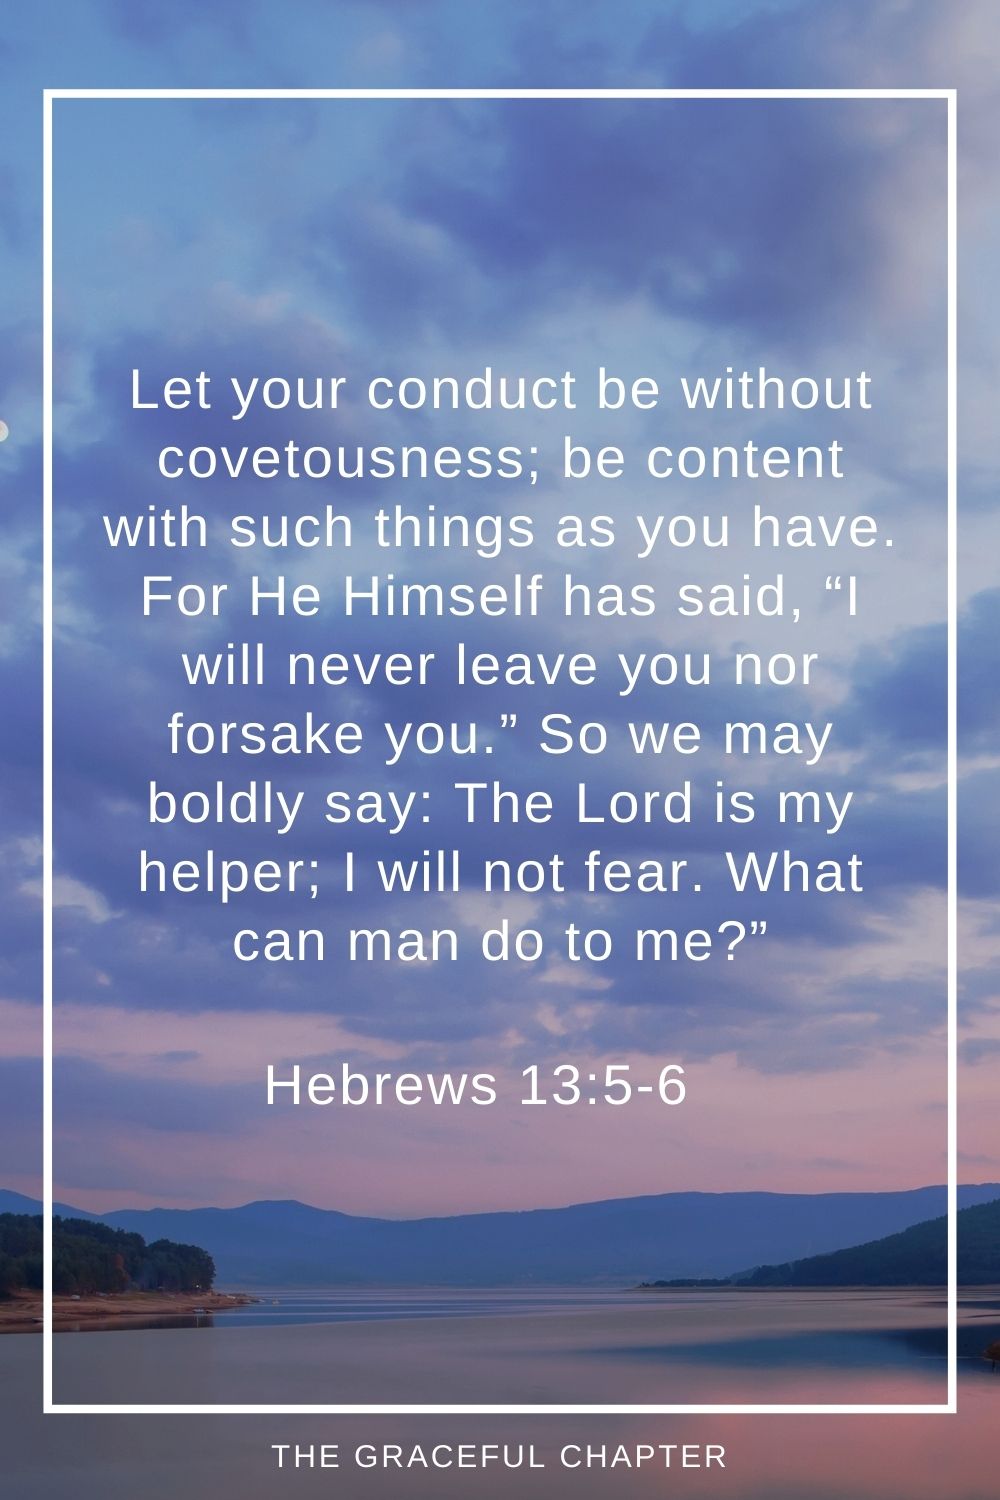 Let your conduct be without covetousness; be content with such things as you have. For He Himself has said, “I will never leave you nor forsake you.” So we may boldly say: The Lord is my helper; I will not fear. What can man do to me?” Hebrews 13:5-6